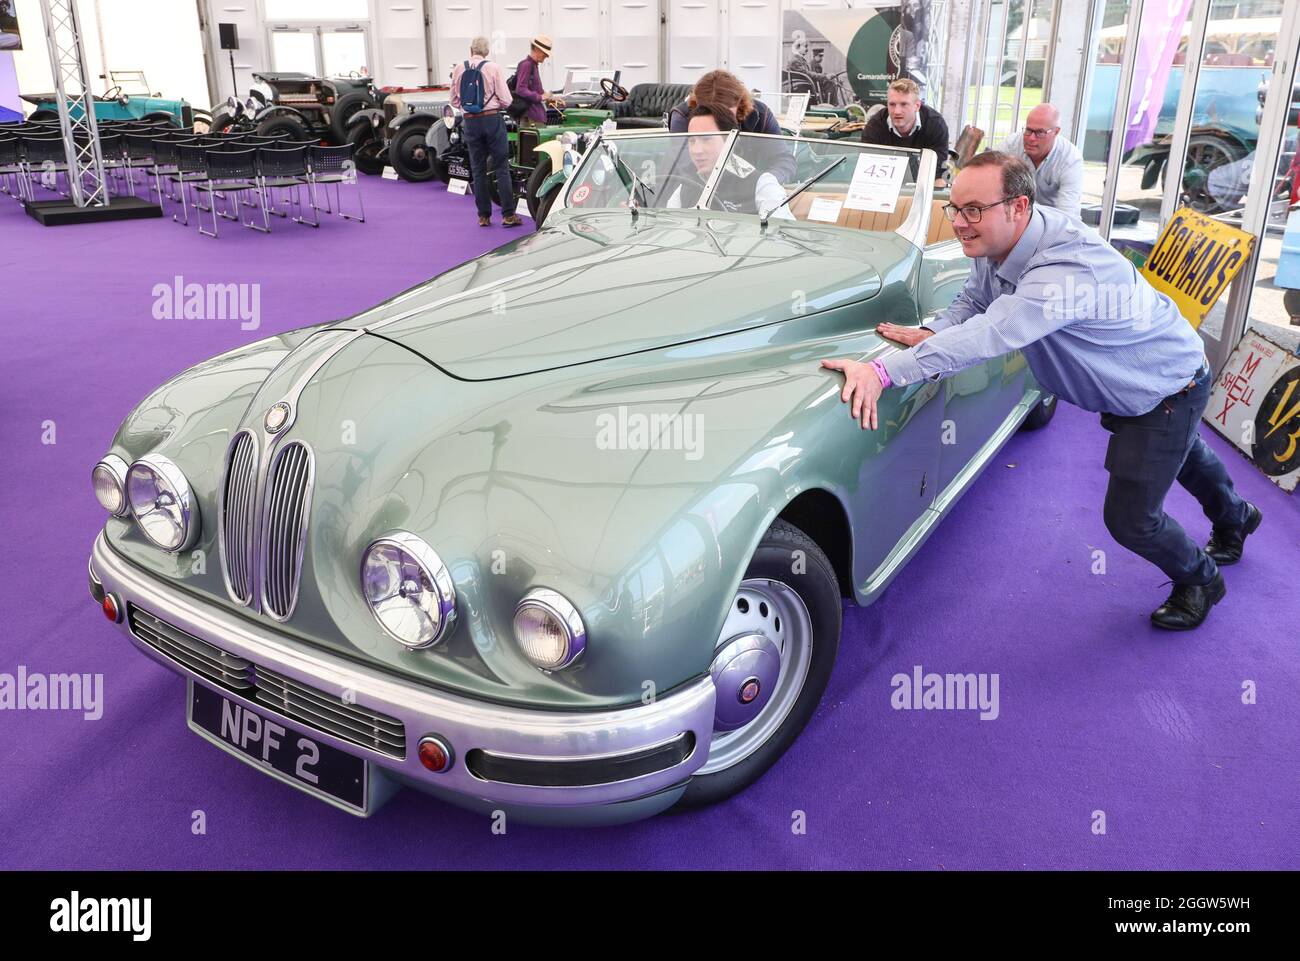 Beaulieu, Hampshire, UK 3rd September 2021. The team at Bonhams position a rare 1949 Bristol 402 Drophead Coupé formally owned by Hollywood actress Jean Simmons, which is to be offered at auction at the Bonhams MPH Beaulieu Sale this Sunday, with an estimate of £150,000 – 200,000. One of the most glamorous luxury motor cars of its day, the Bristol was bought new for the Hollywood actress by her future husband and fellow star Stewart Granger as one of a matching pair. Credit: Stuart Martin/Alamy Live News Stock Photo